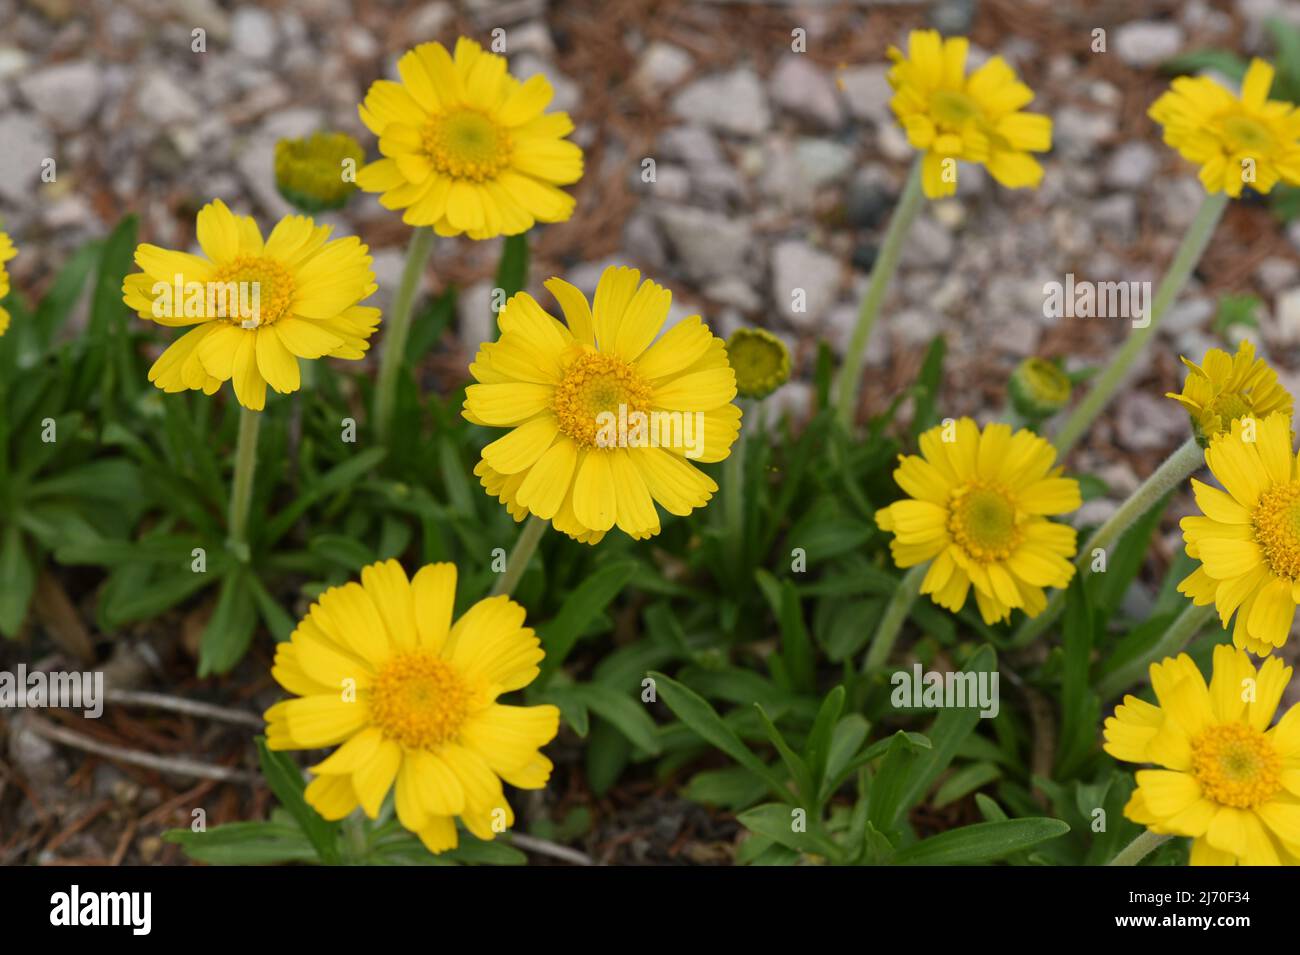 Tetraneuris acaulis is a North American species of flowering plant in the sunflower family. Stock Photo